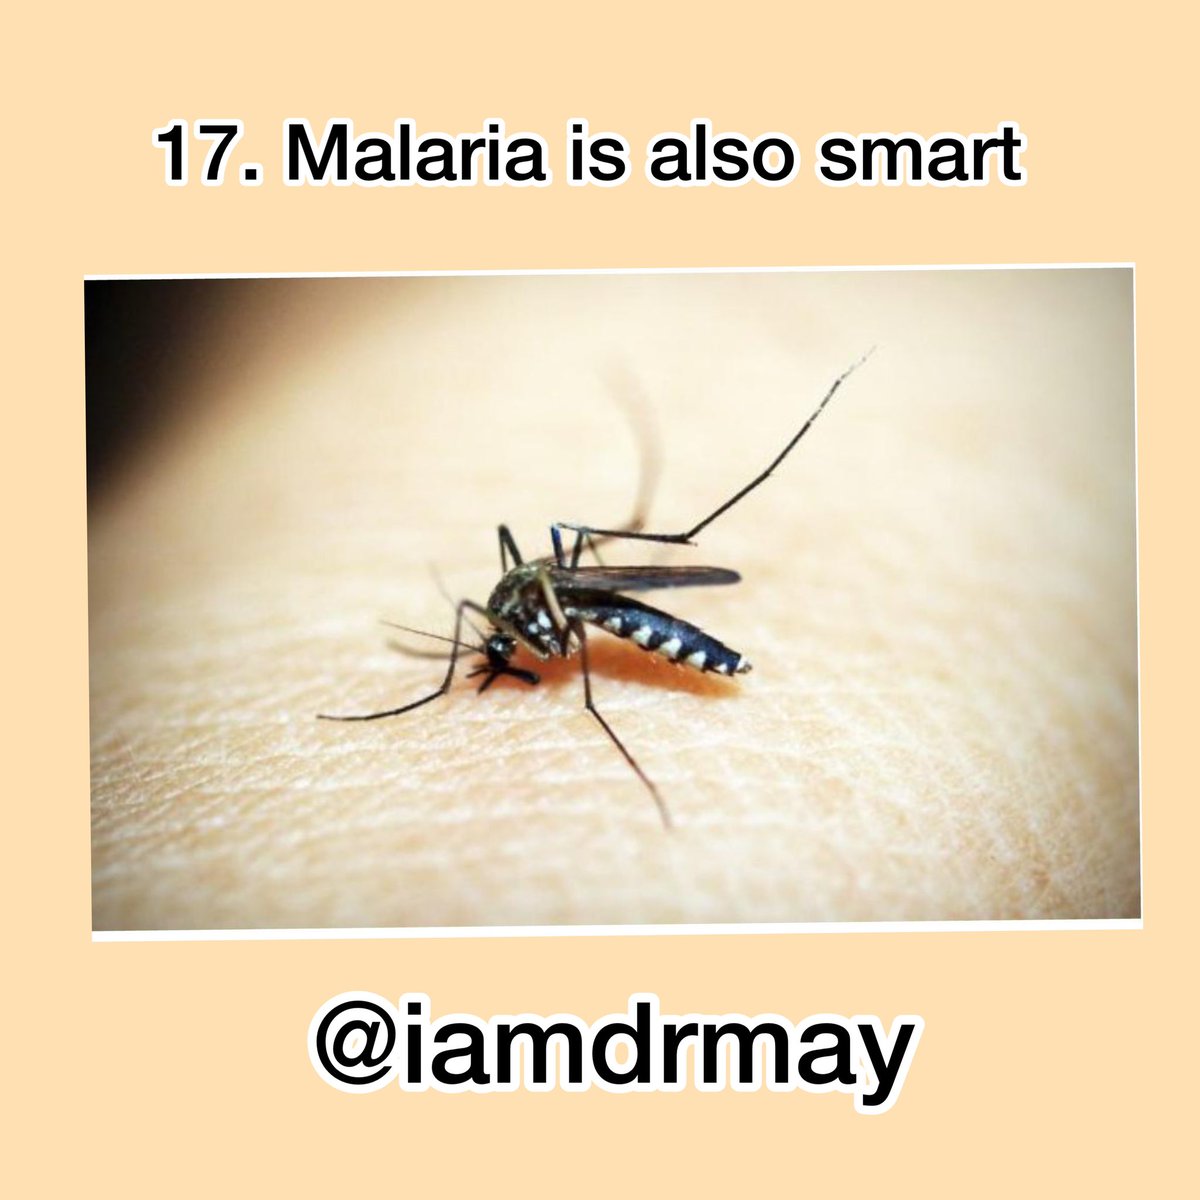 The malaria parasite is constantly evolving, so it can evade a person’s immune system. Even malaria-carrying mosquitos can become immune to the pesticides used to control and kill it.  #WorldMalariaDay2021